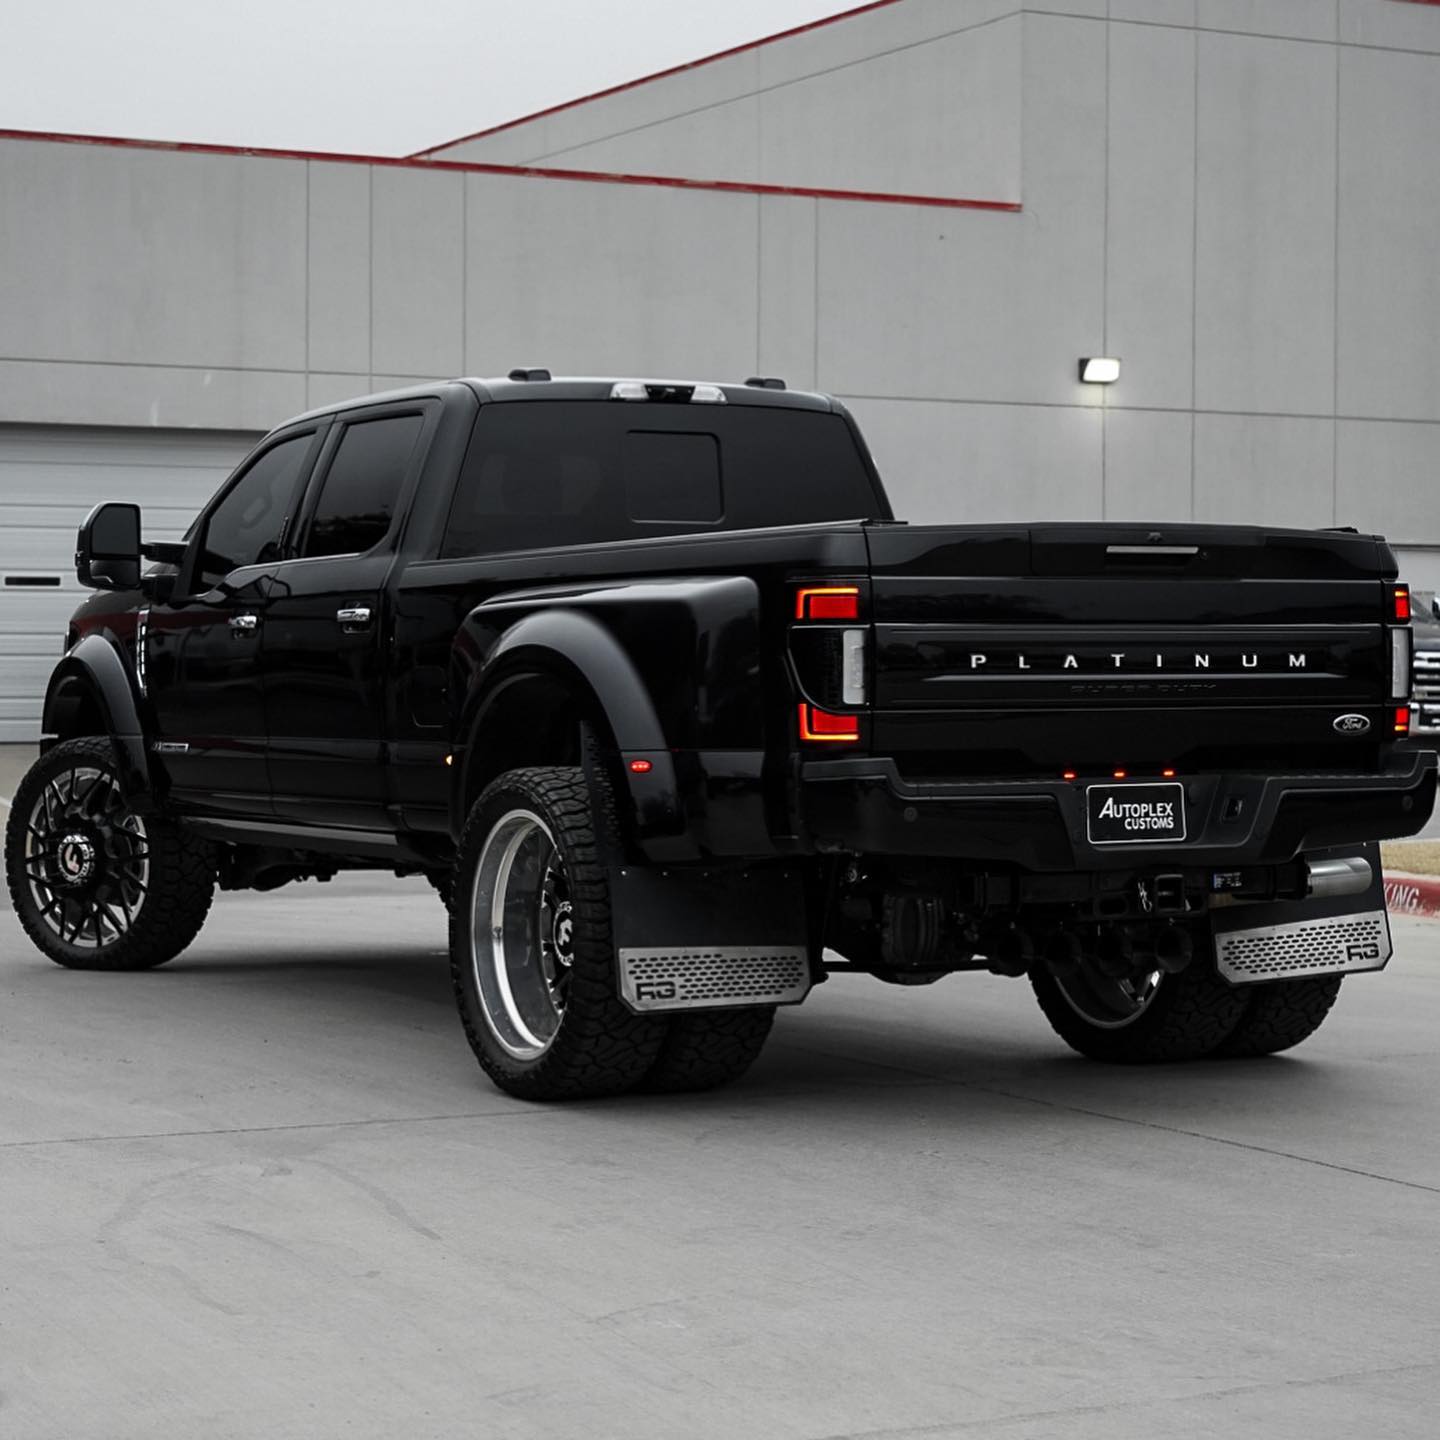 Pitch Black, Lifted Ford F450 Dually on Spiked 26s Is Not Your Average